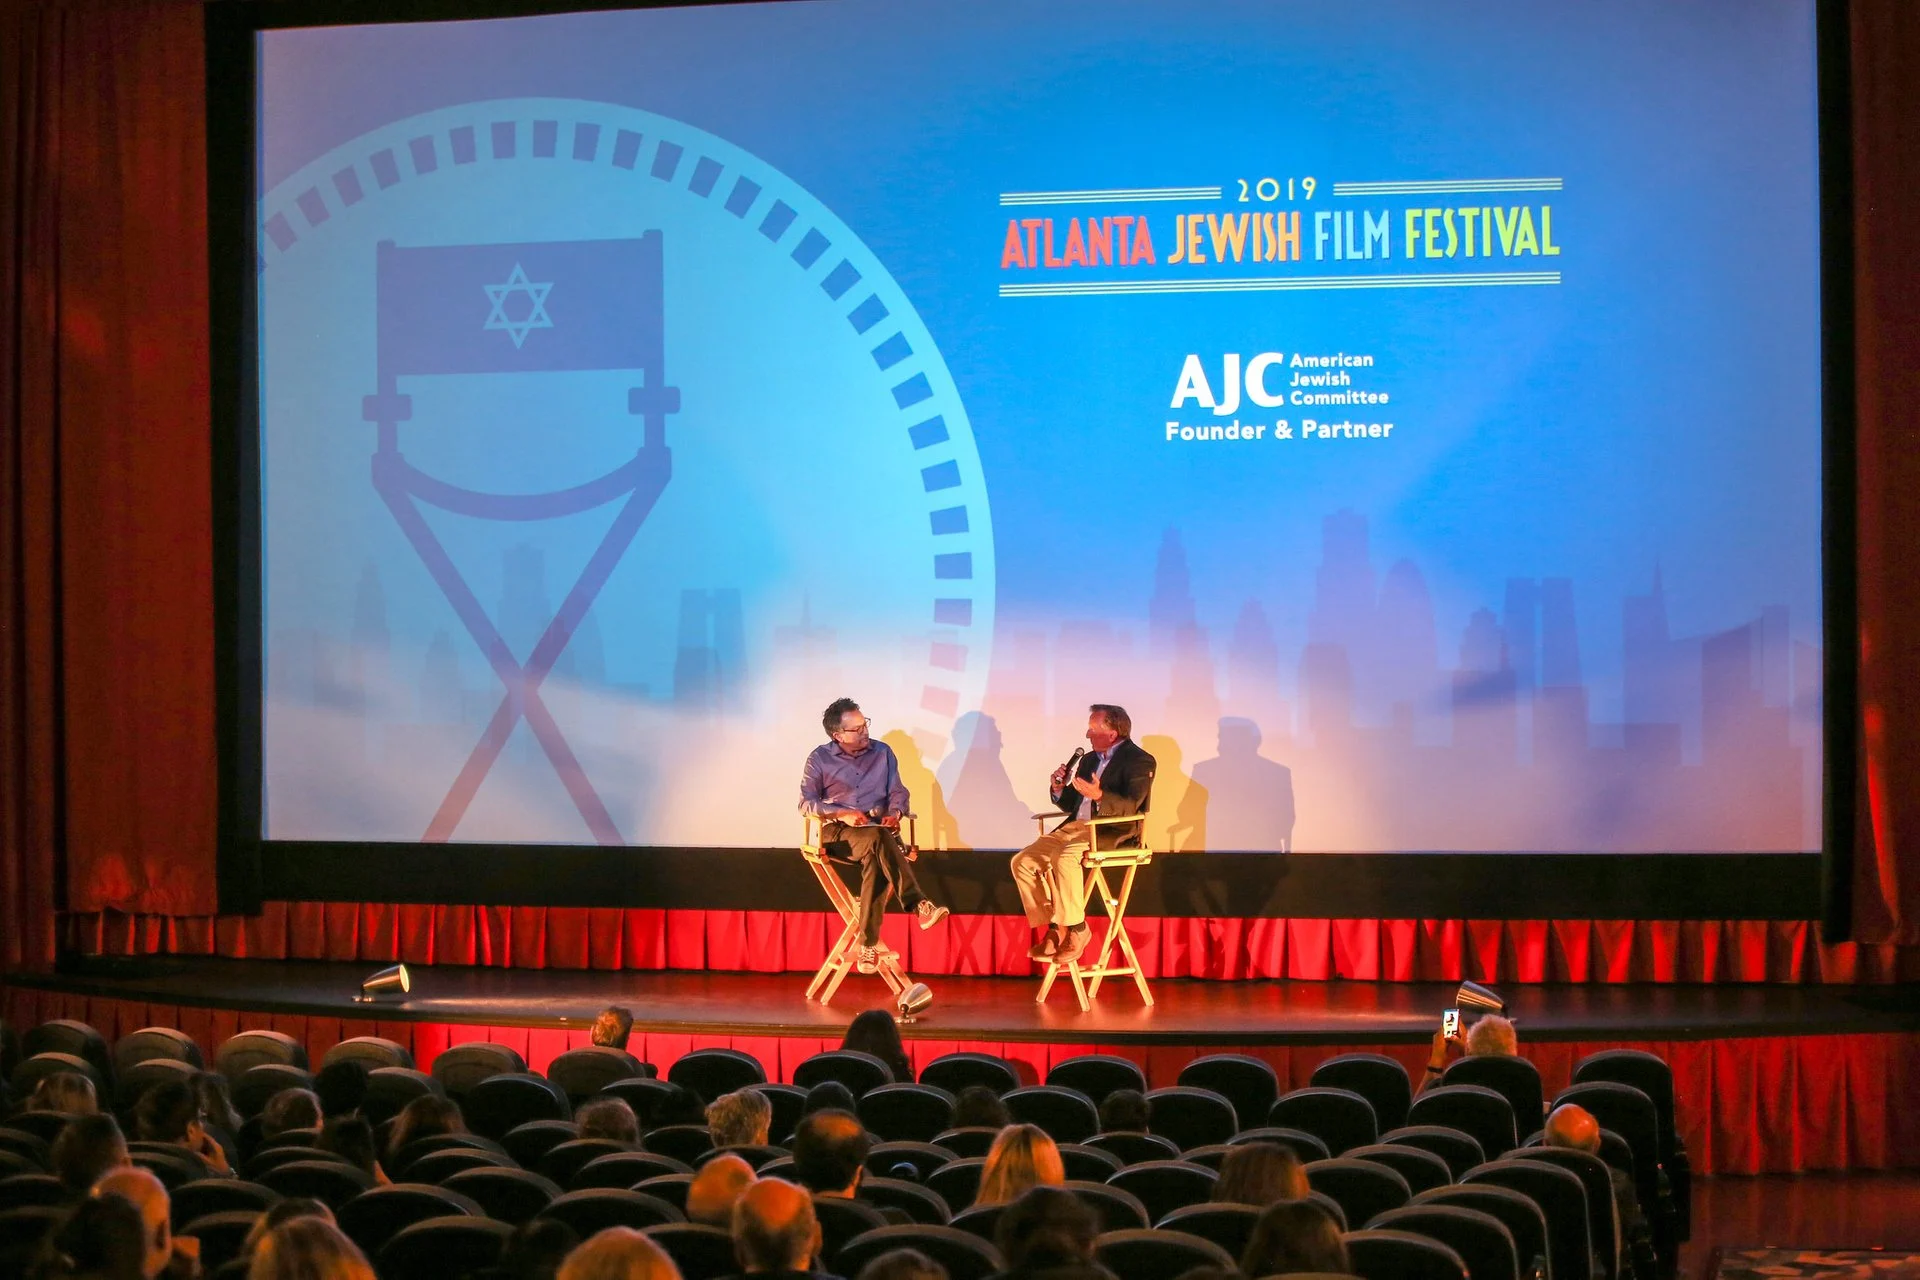 20 Facts About Jewish Film Festival